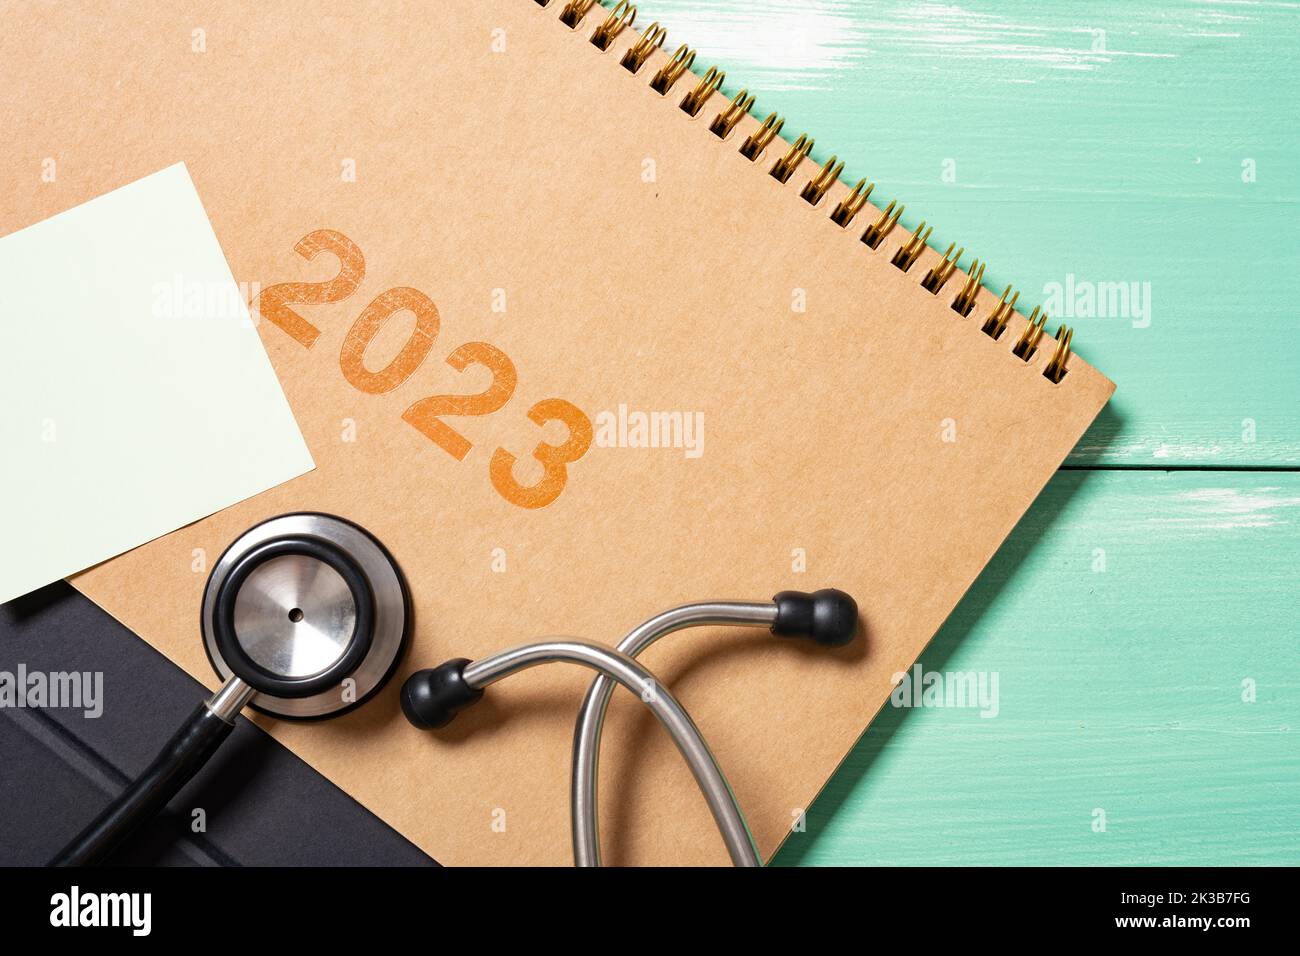 2023 calendar with a stethoscope and blank memo Stock Photo